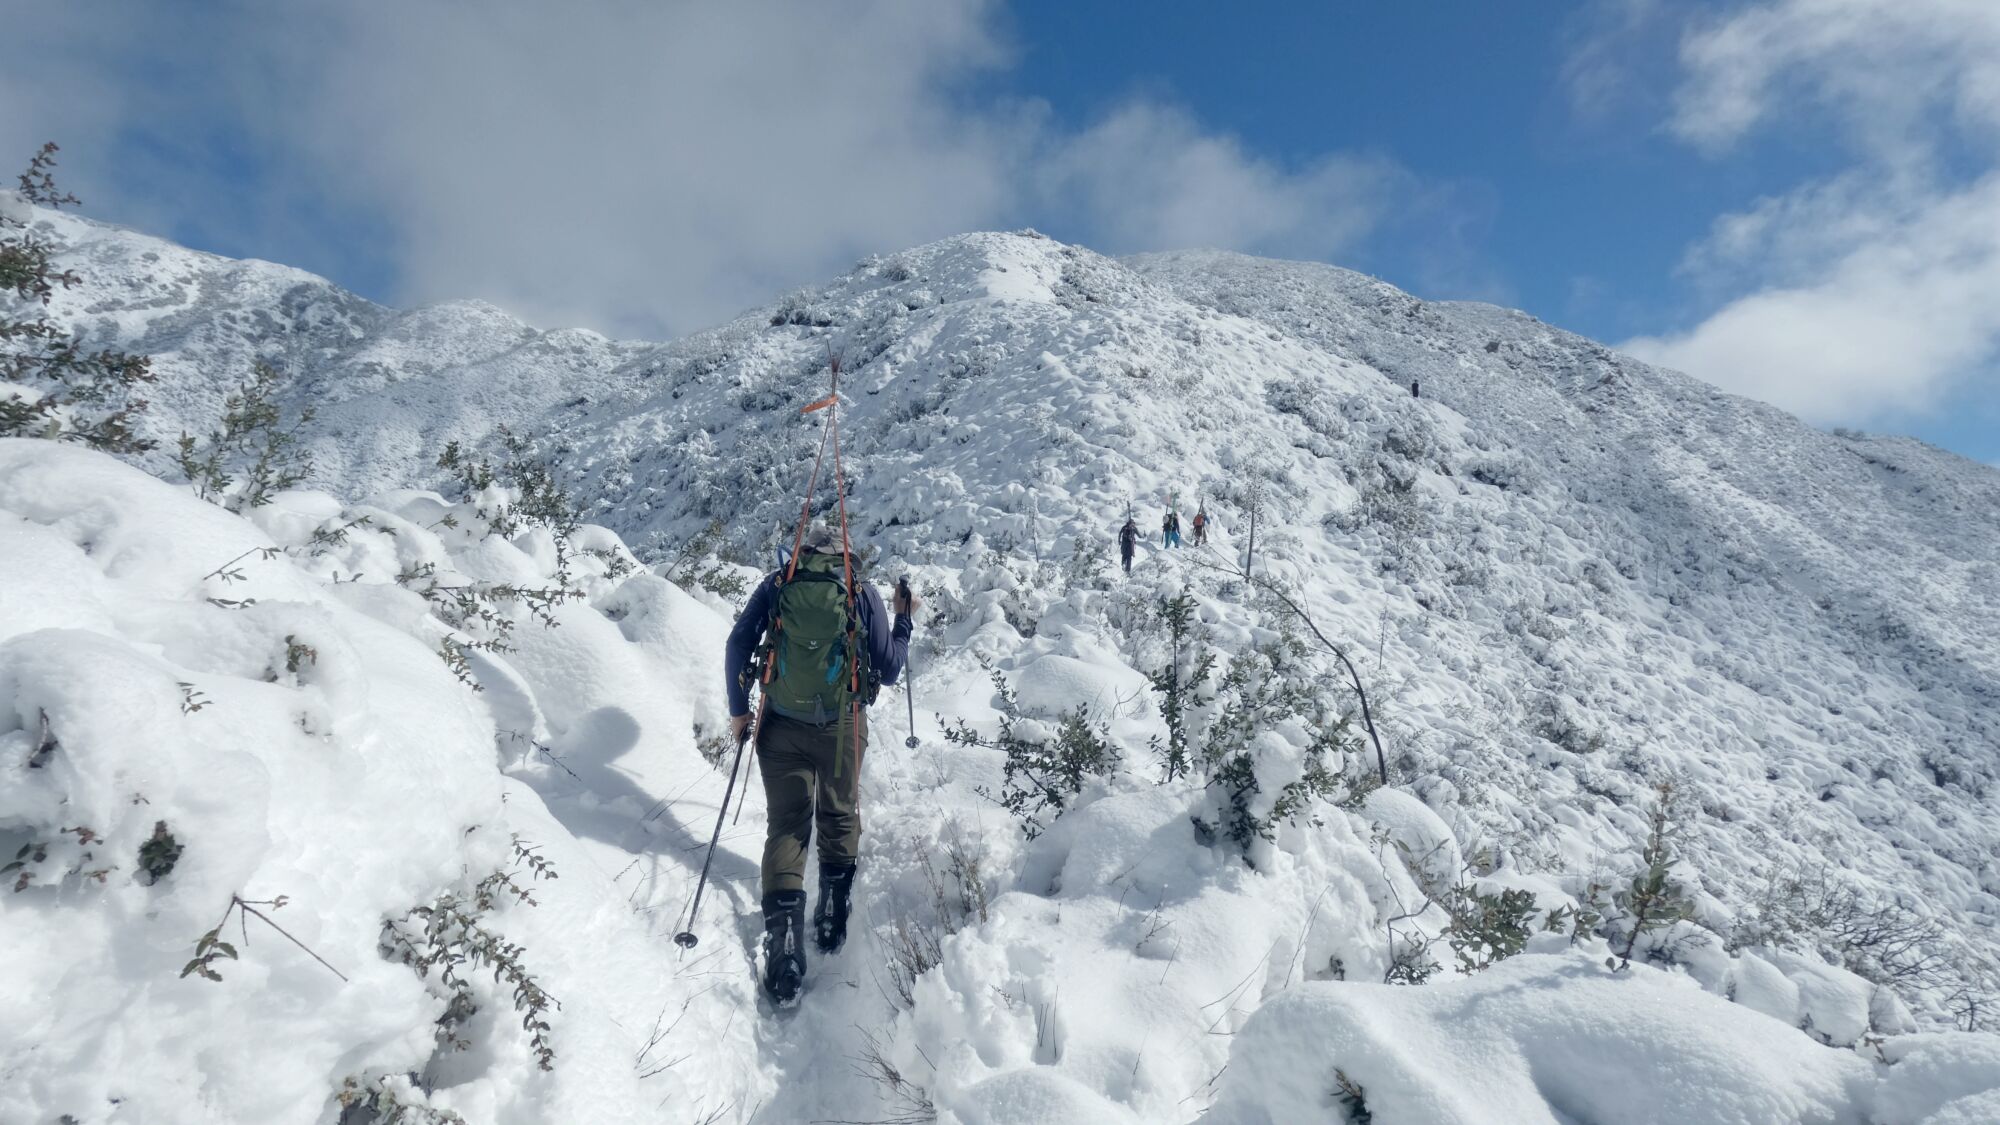 Skiers make their way to the summit of Mt. Lukens on Sunday.